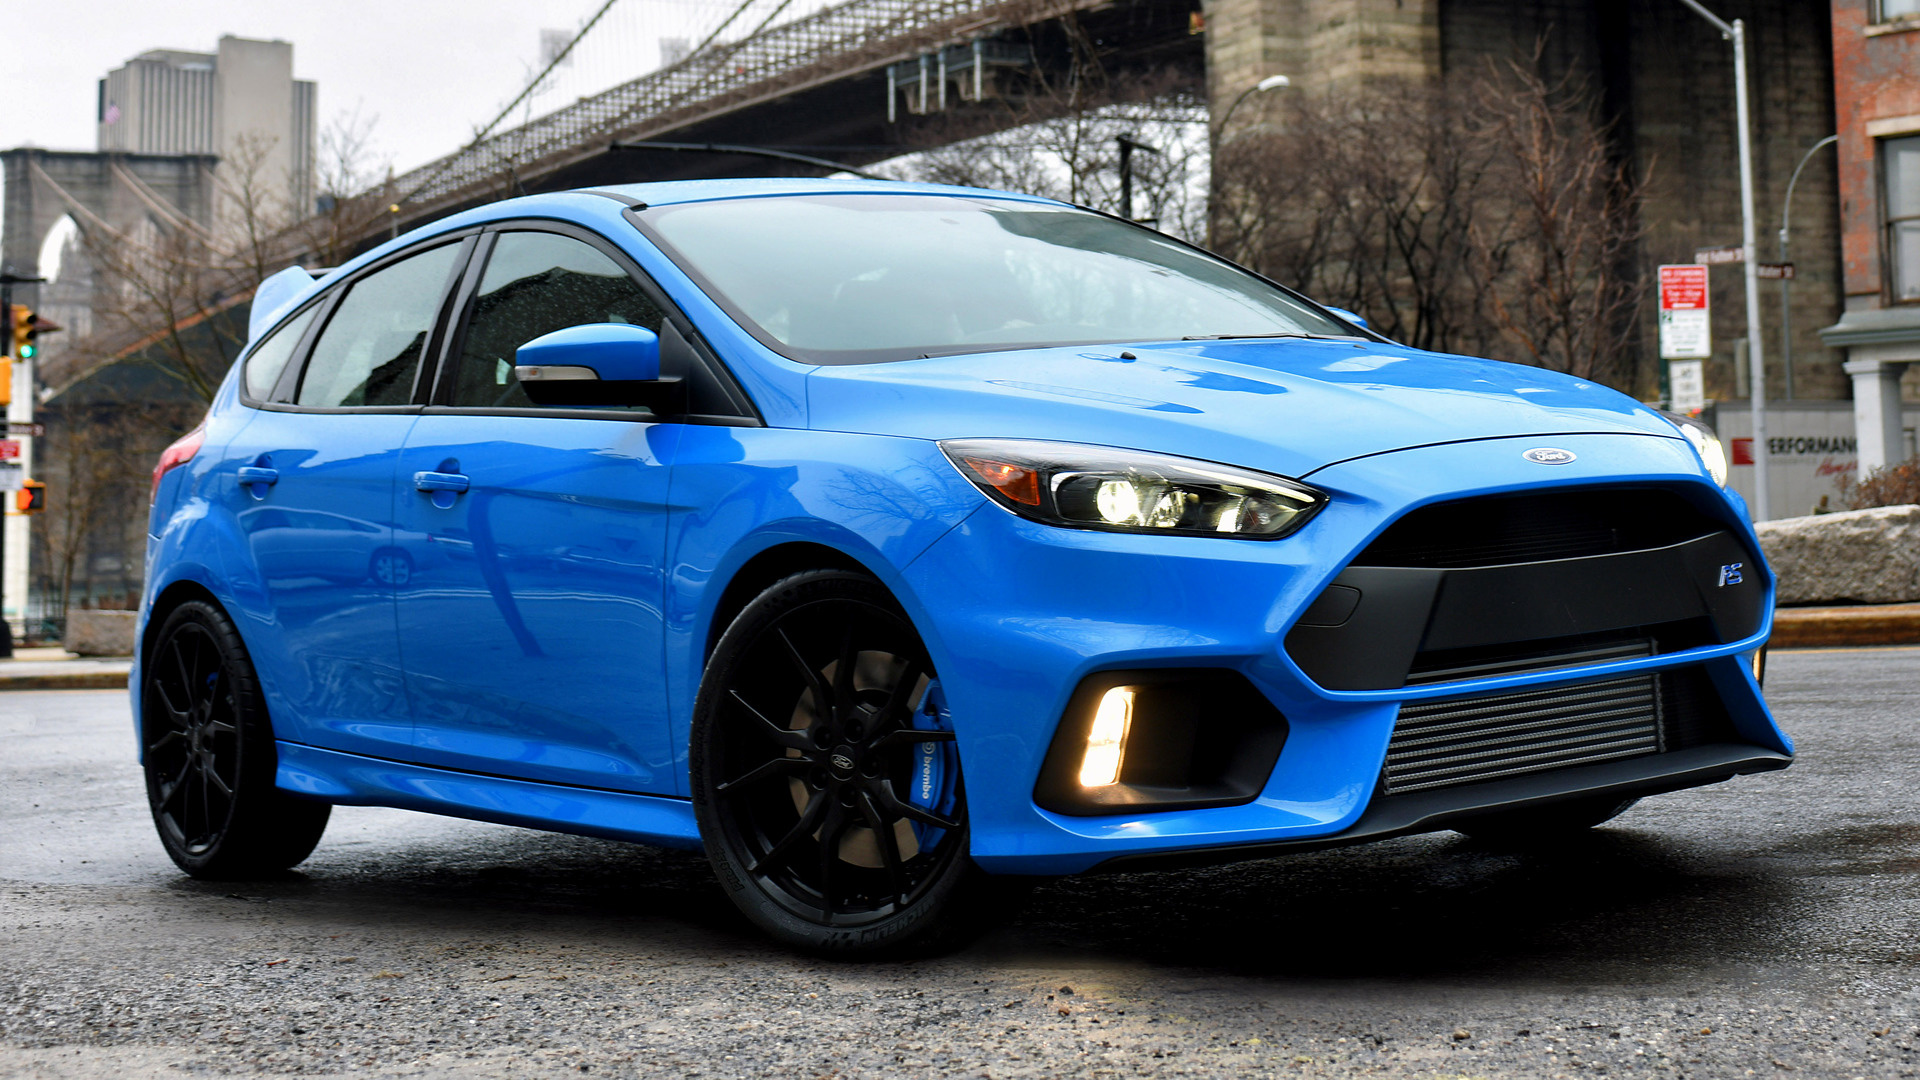 Free Download Ford Focus Rs 24736 1920x1080 For Your Desktop Mobile Tablet Explore 42 2016 Ford Focus St Wallpaper 800x384 Ford Mytouch Wallpaper Ford Focus Rs Wallpaper 2015 Ford Focus Wallpaper